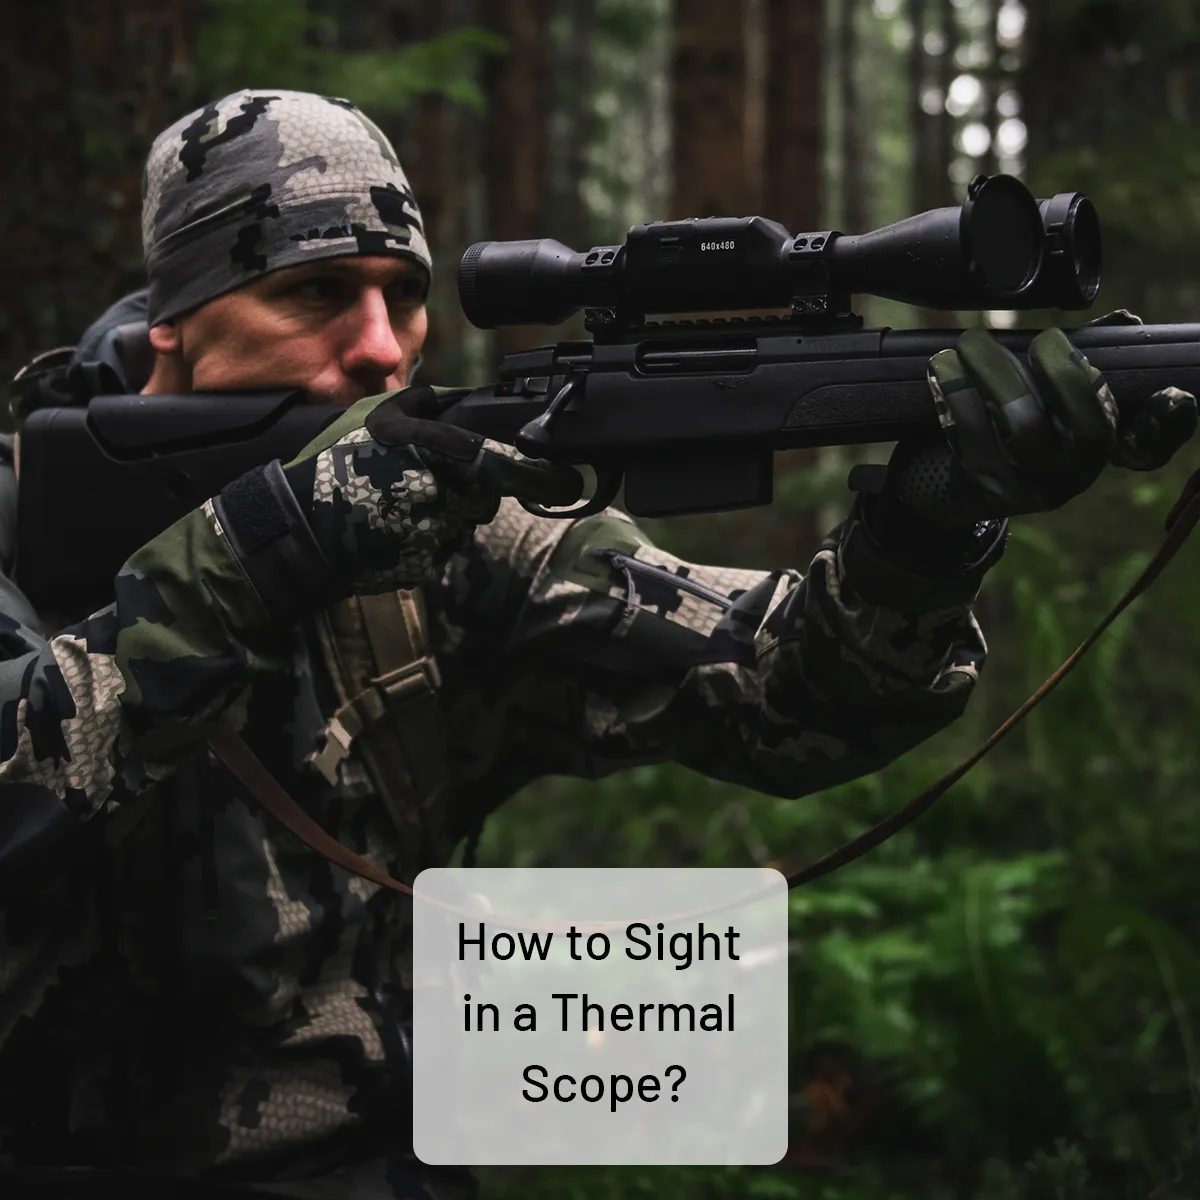 How to sight in a thermal scope?